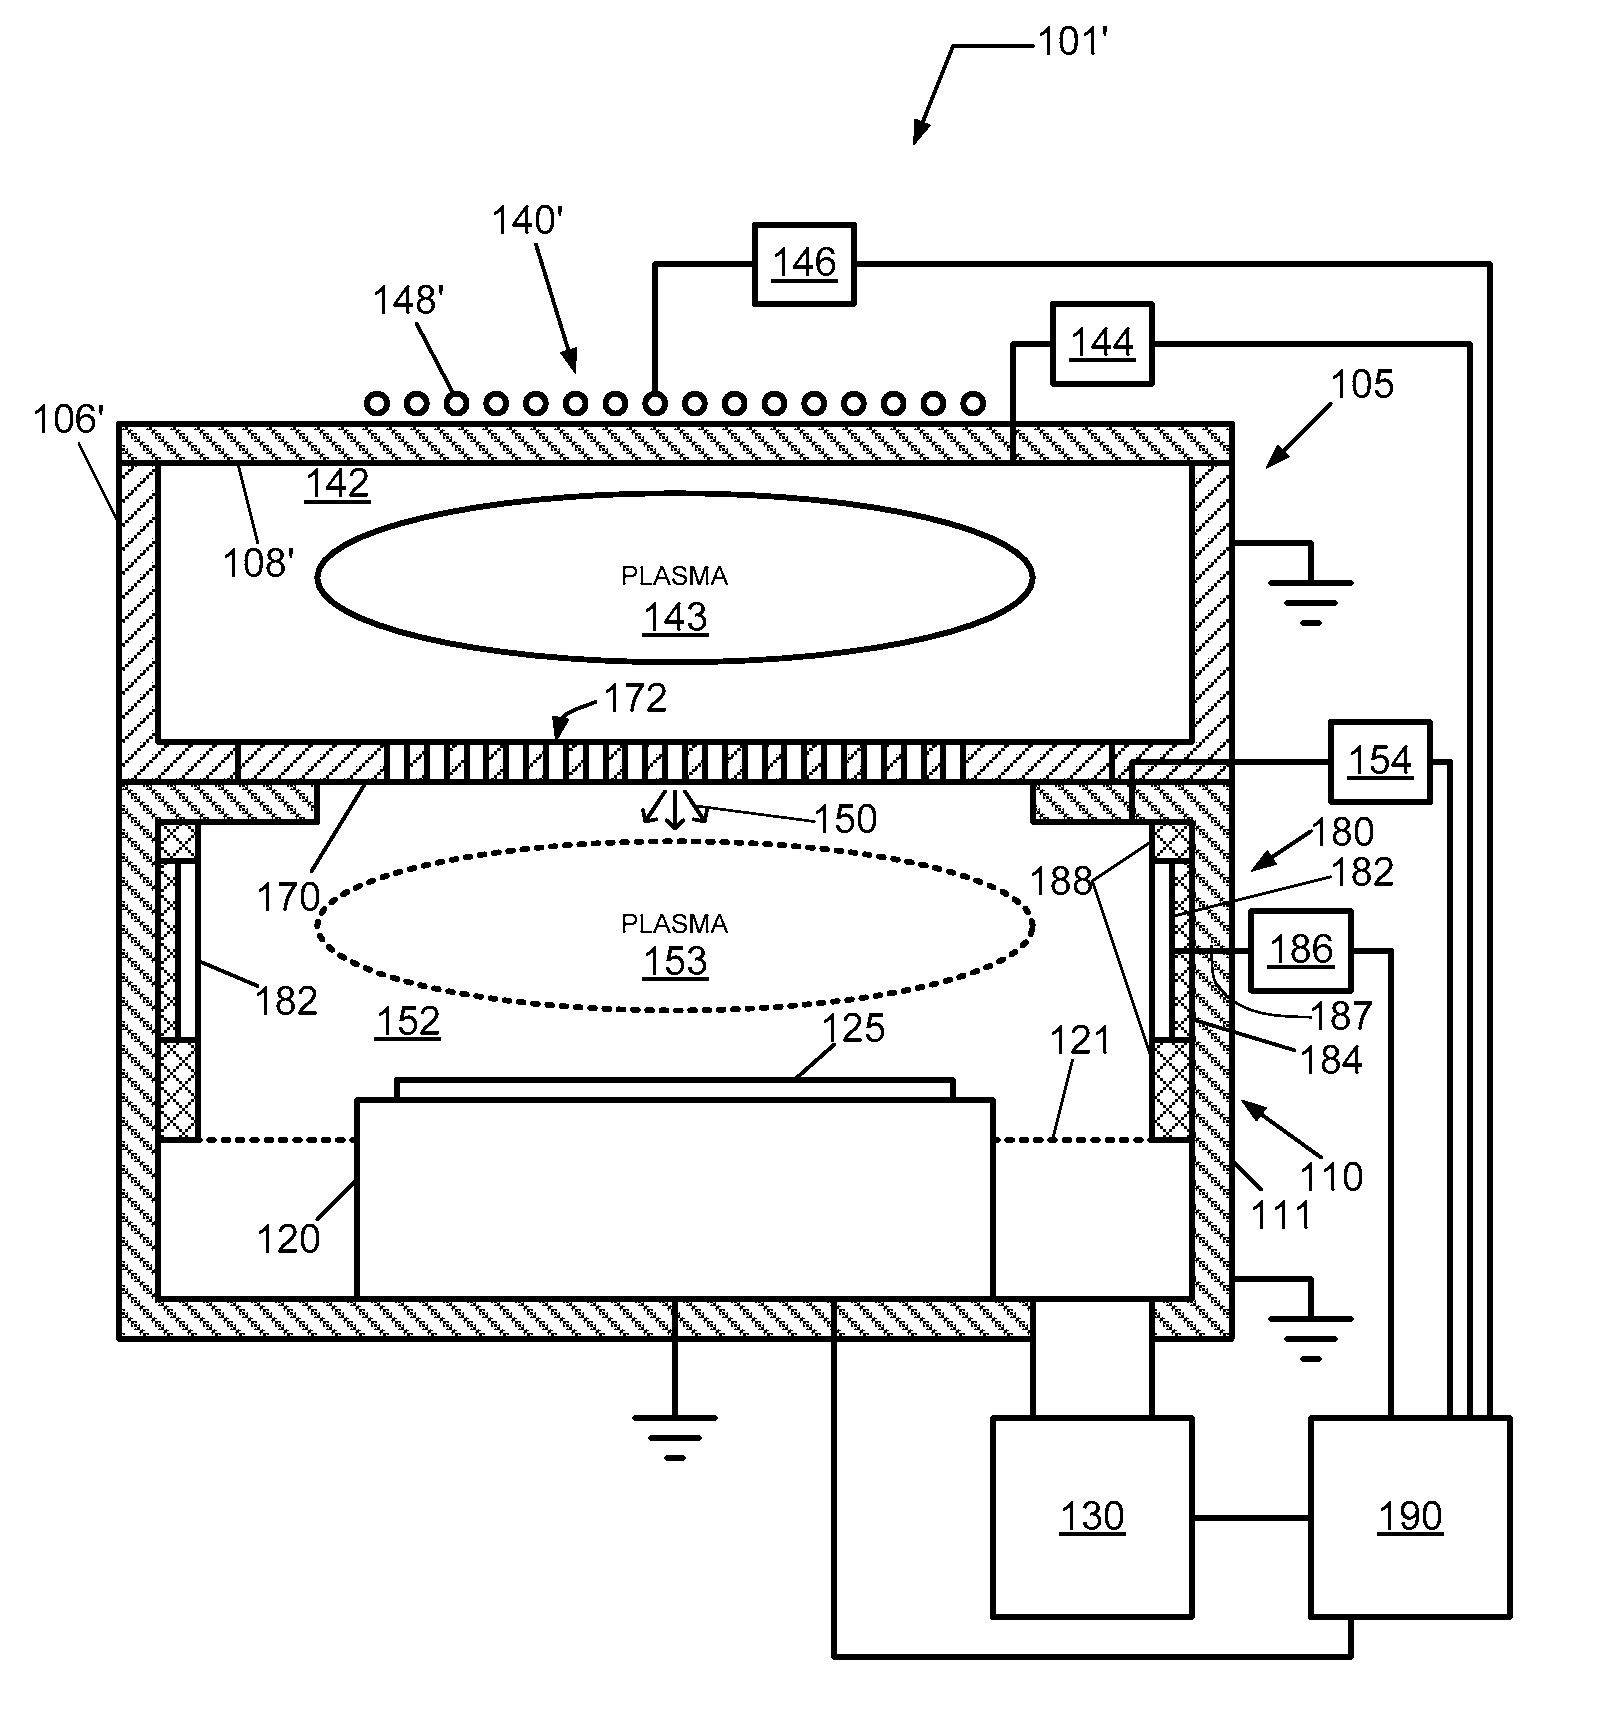 Mono-energetic neutral beam activated chemical processing system and method of using